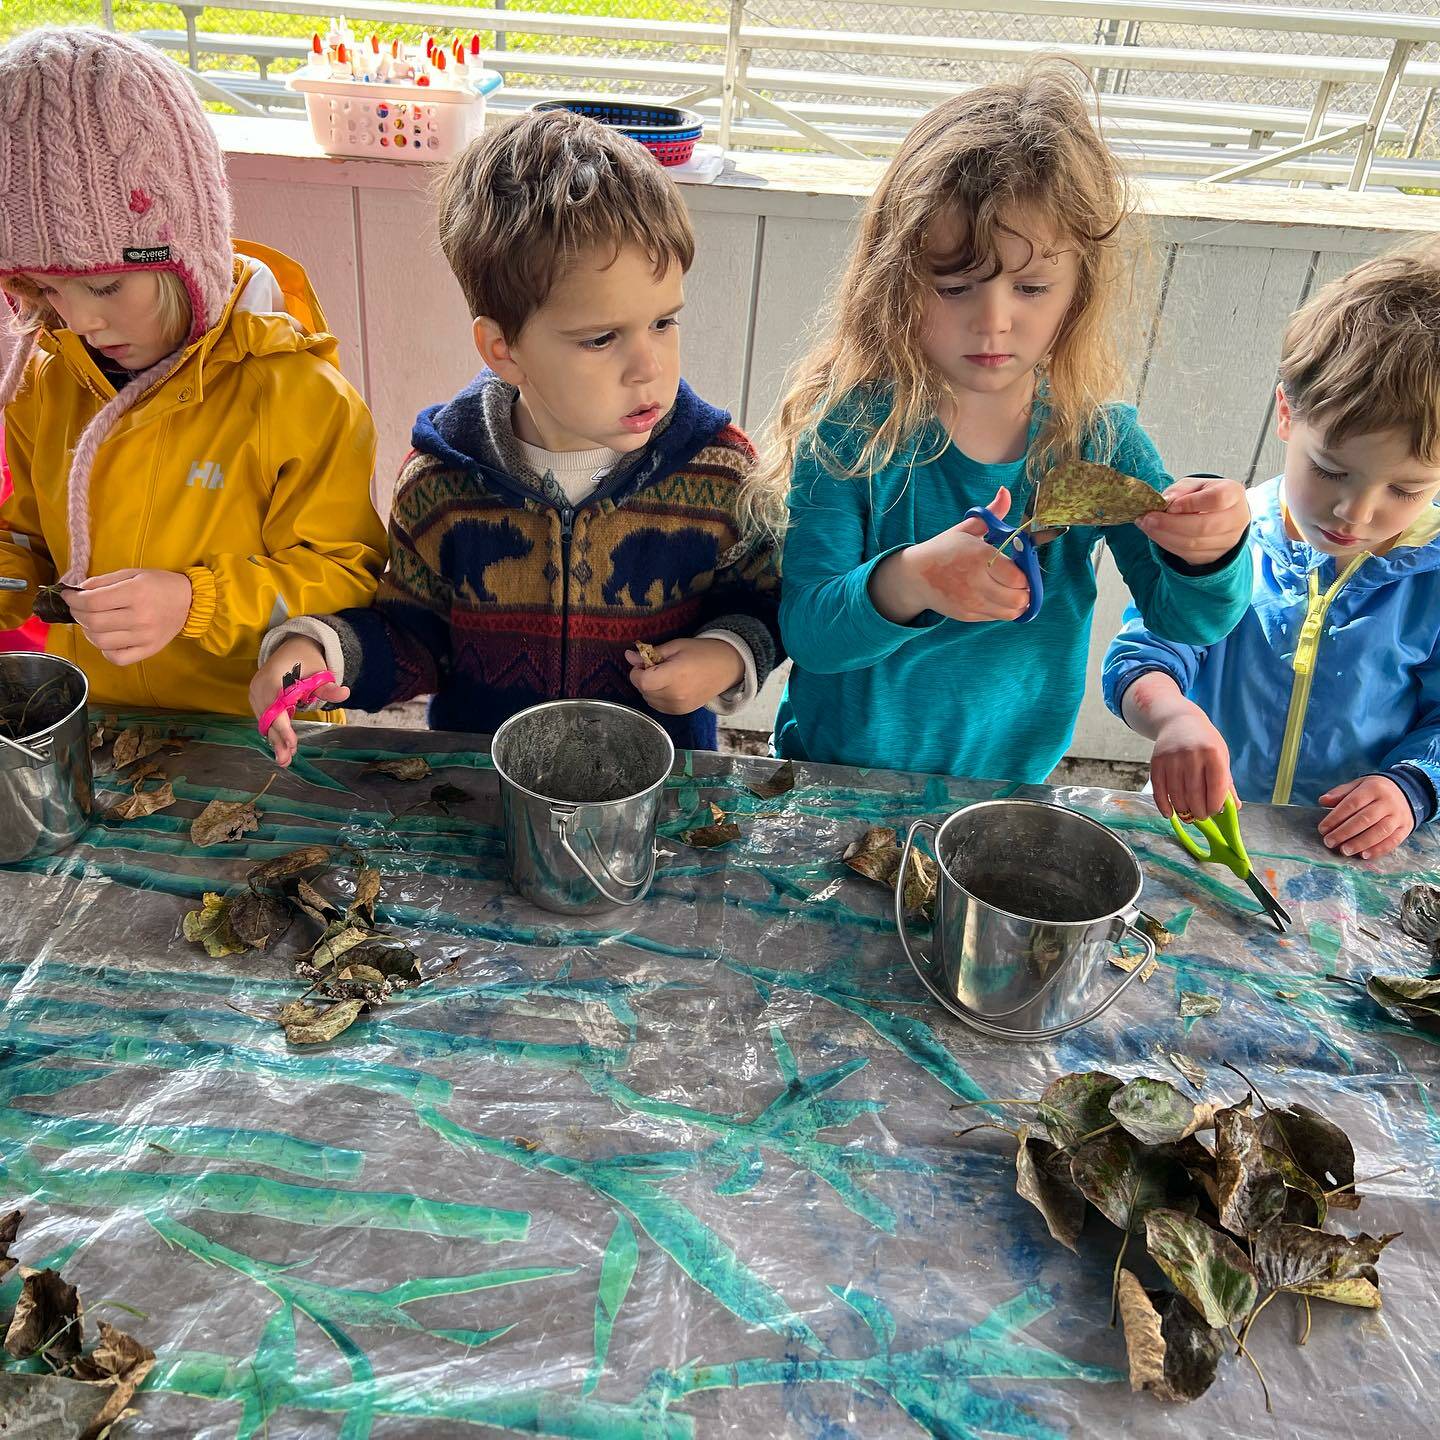 Students attending Sprouts Preschool make magic wands out of leaves in Seward, Alaska. (Photo courtesy Seward Sprouts Preschool)